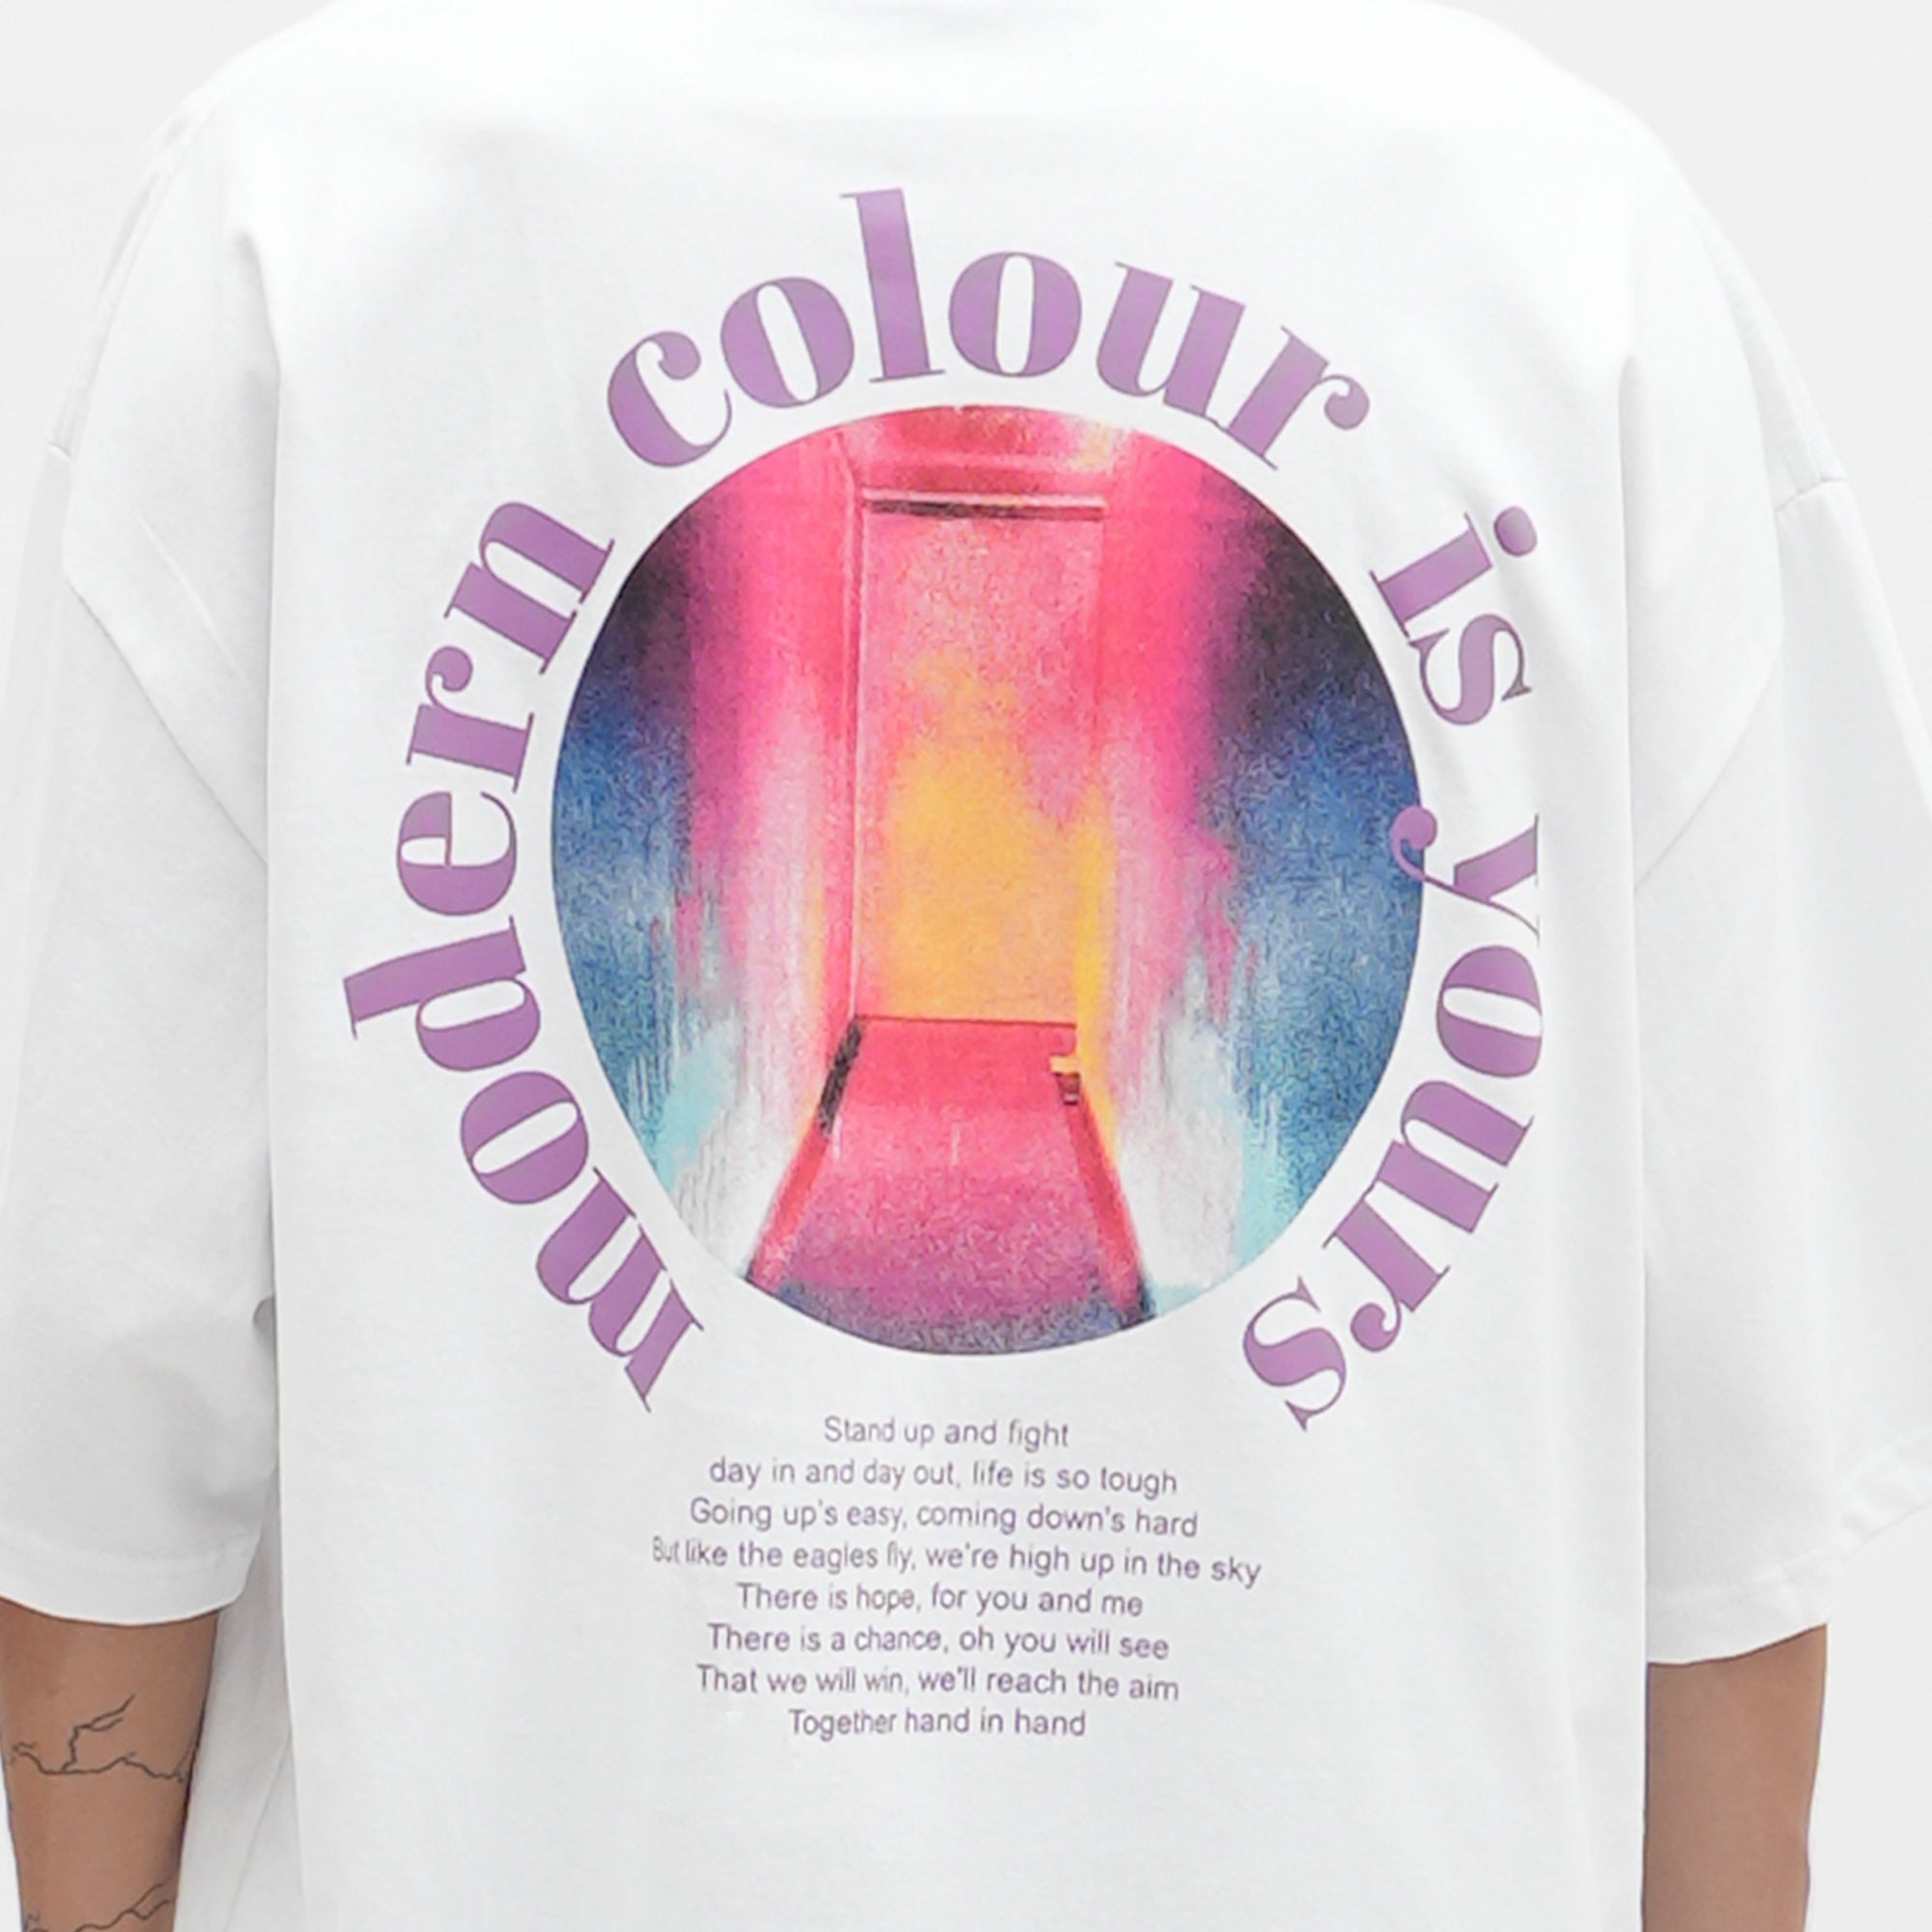 Roughneck OT158 White Modern Colour Is Your Oversize Tshirt